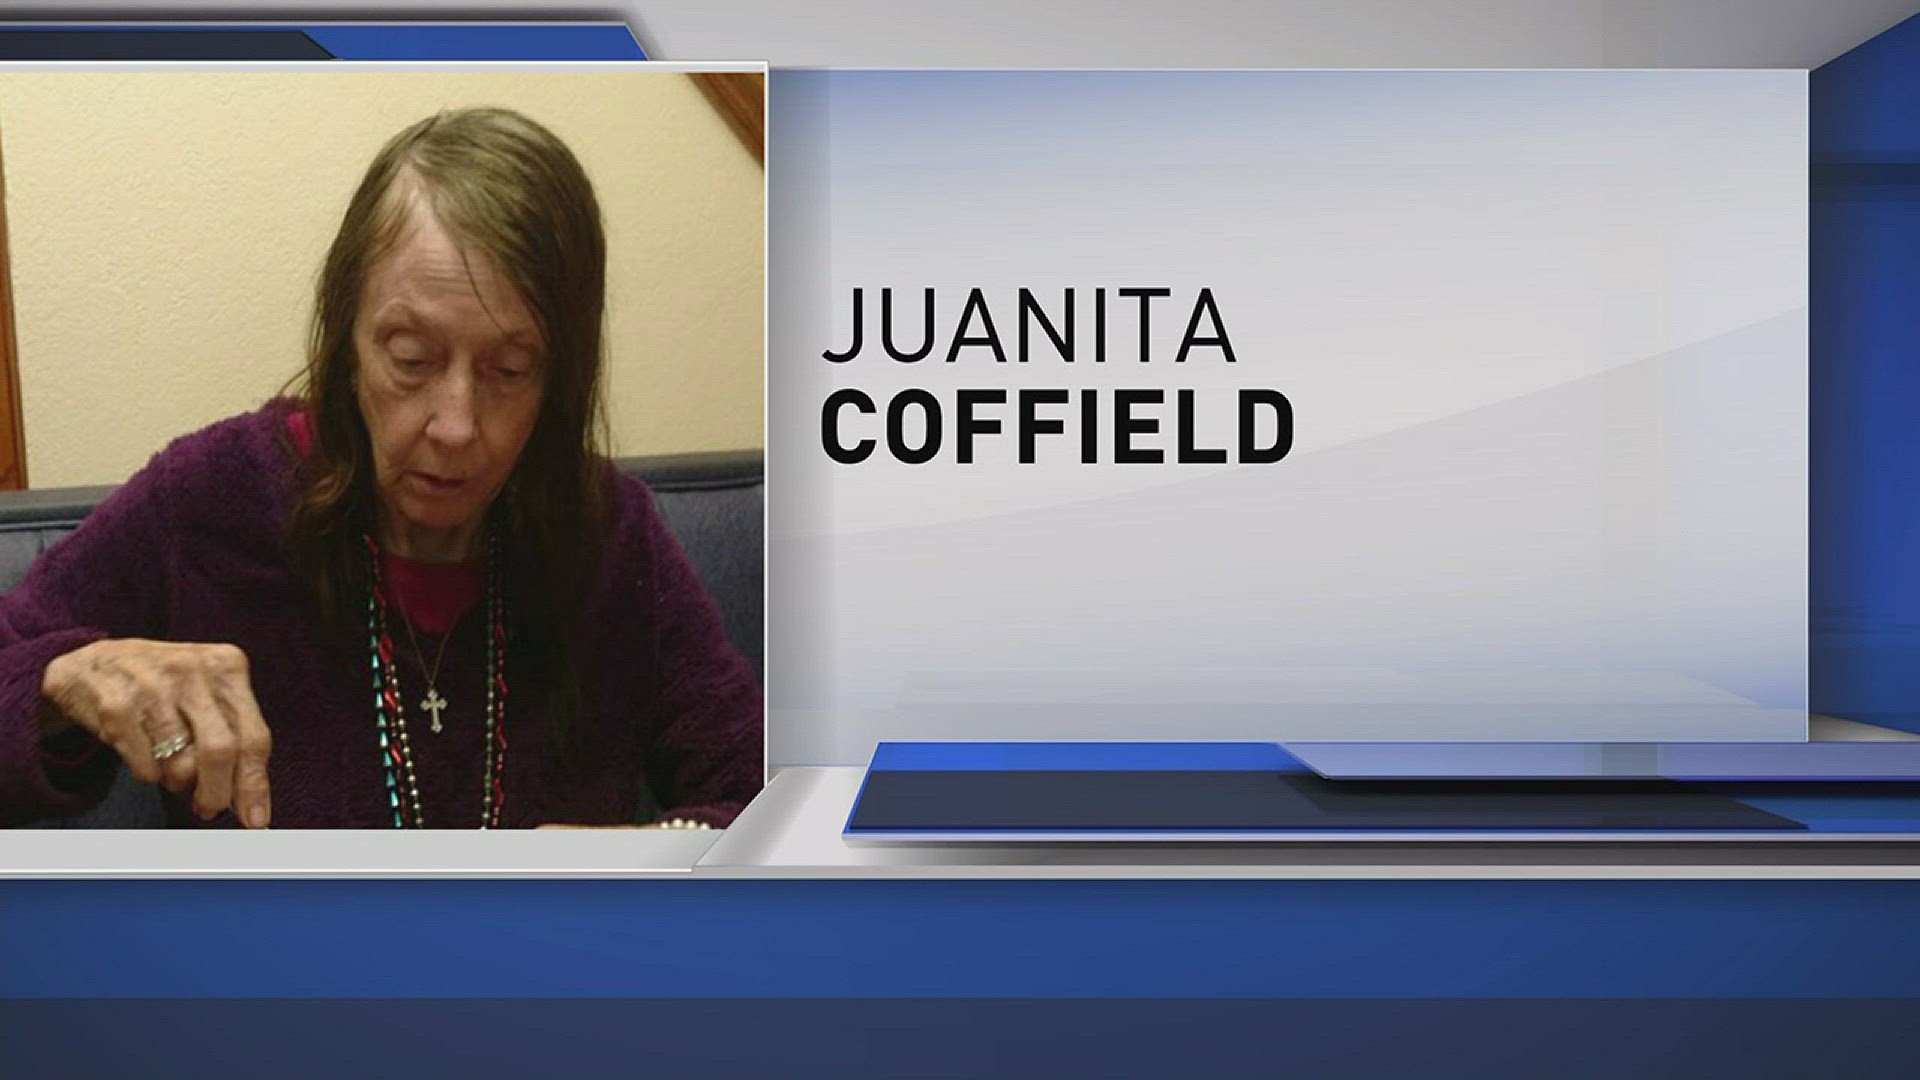 Officials suspended the major ground effort to find 77-year-old Juanita Coleman, who went missing in Chesapeake.